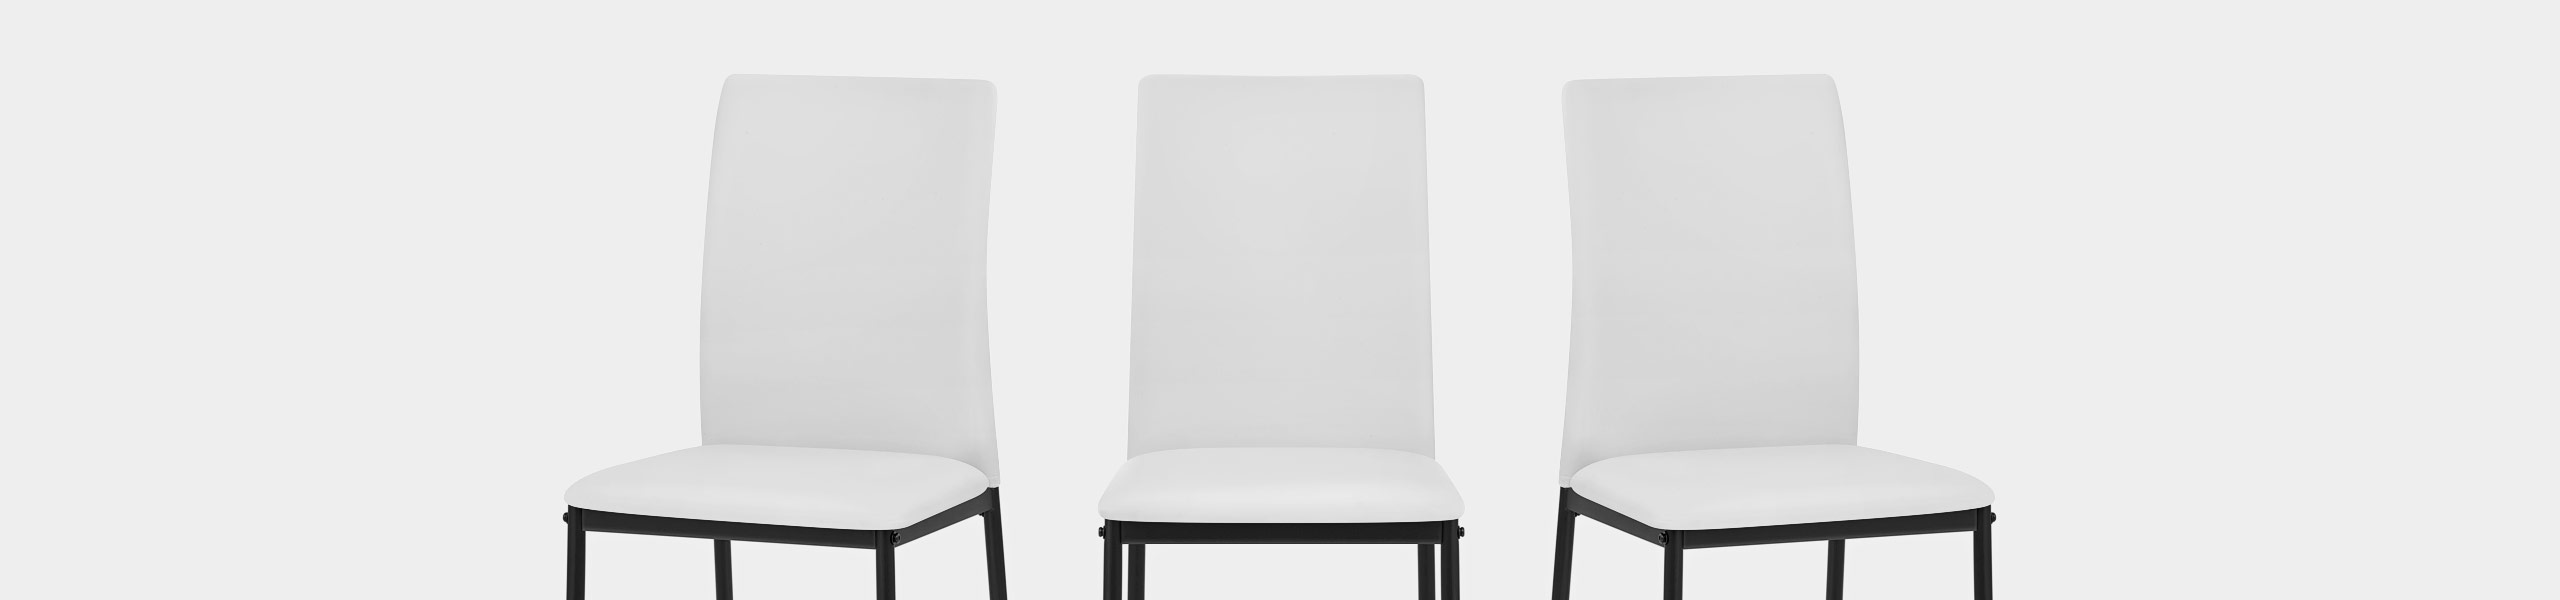 Franky Dining Chair White Video Banner